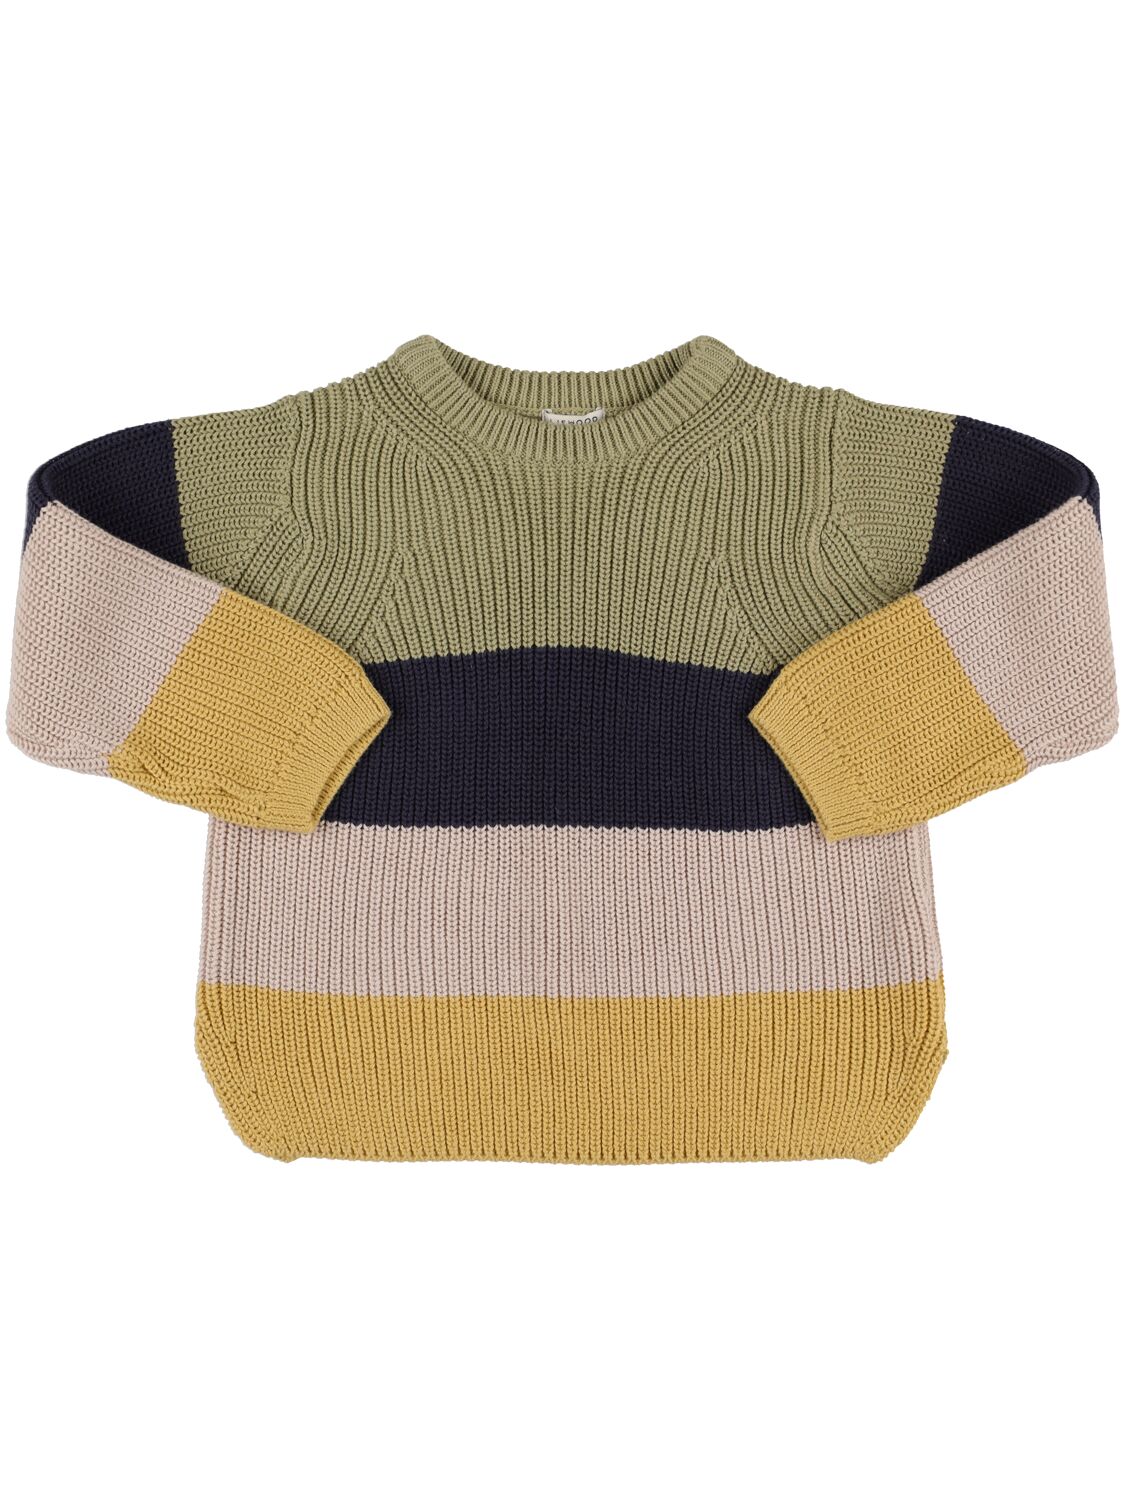 Image of Cotton Knit Sweater